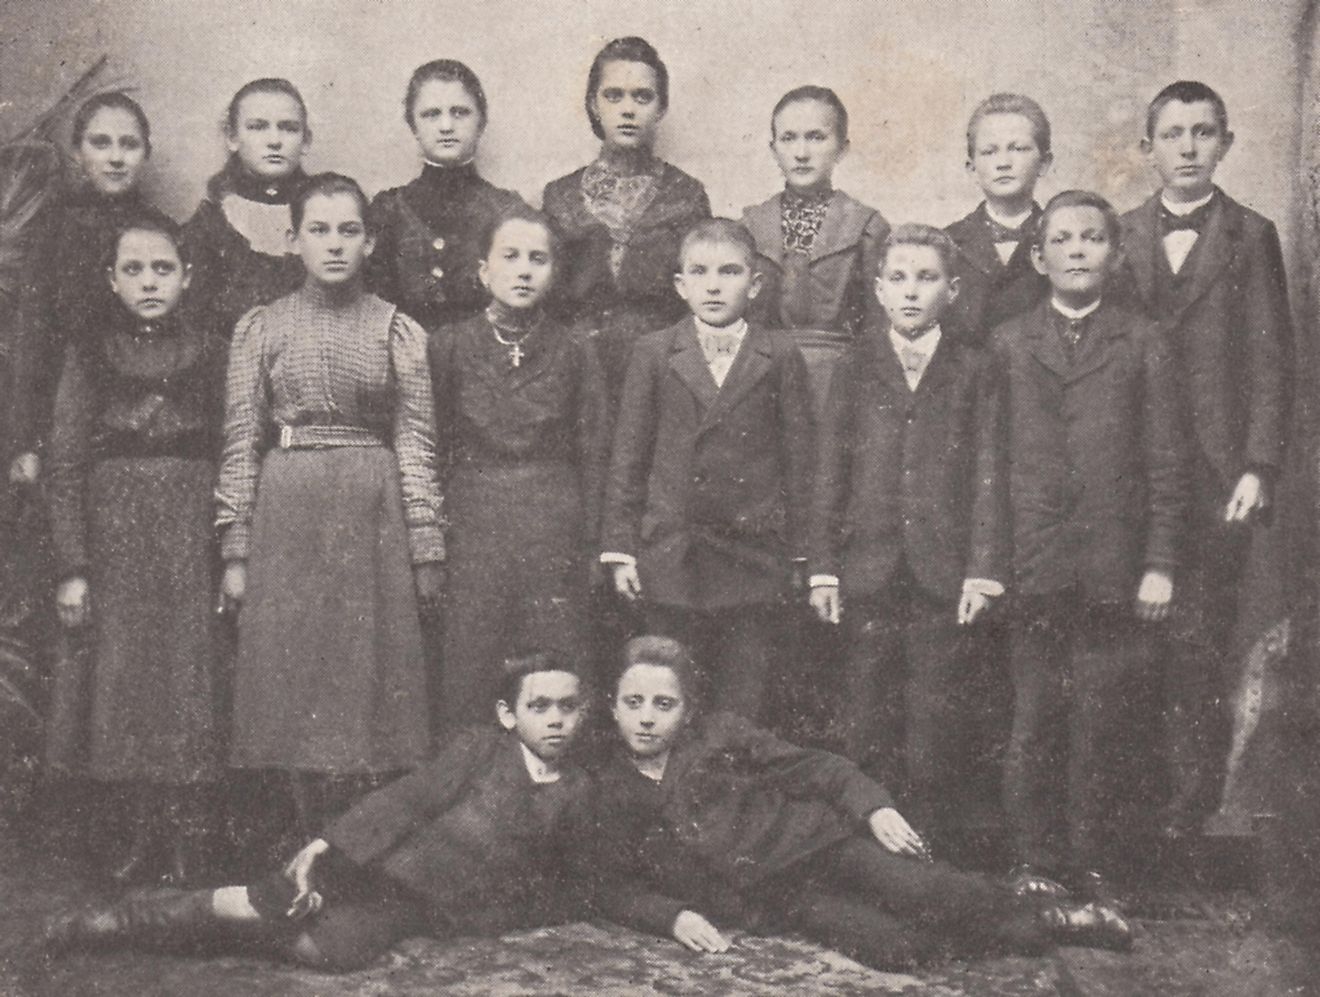 In one catholic school located in the town of Września, students protested after the Germans announced how all classes about religion would be taught in the German language.